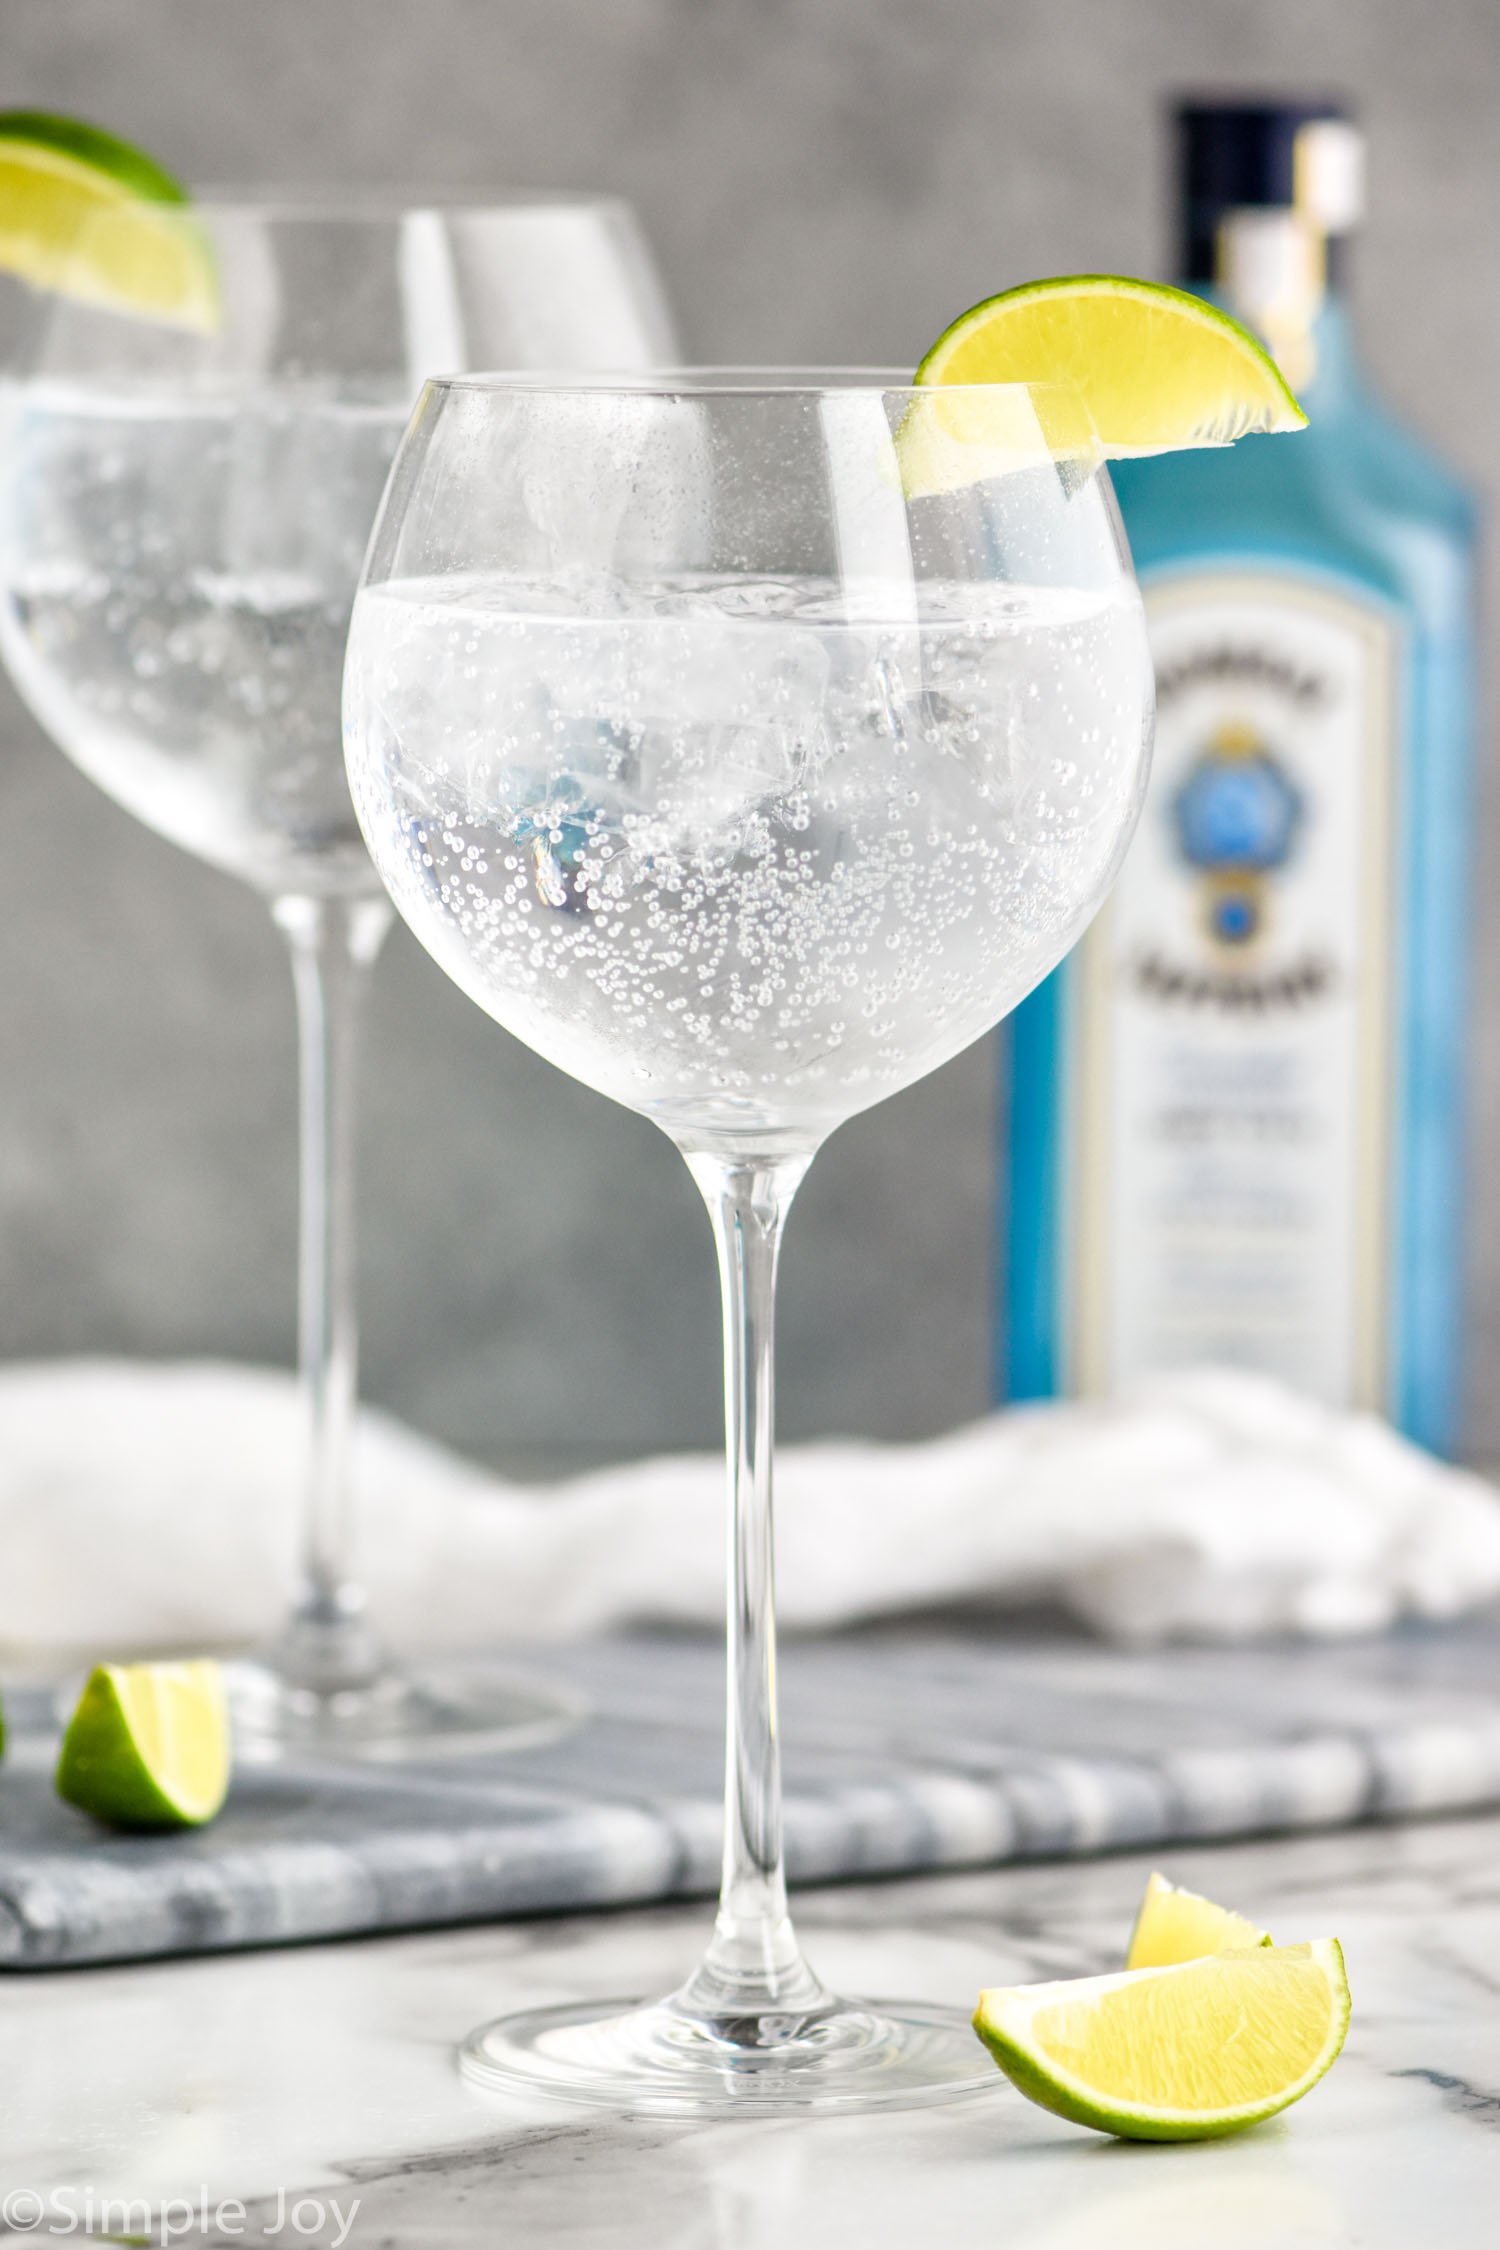 https://www.simplejoy.com/wp-content/uploads/2018/03/gin-and-tonic.jpg